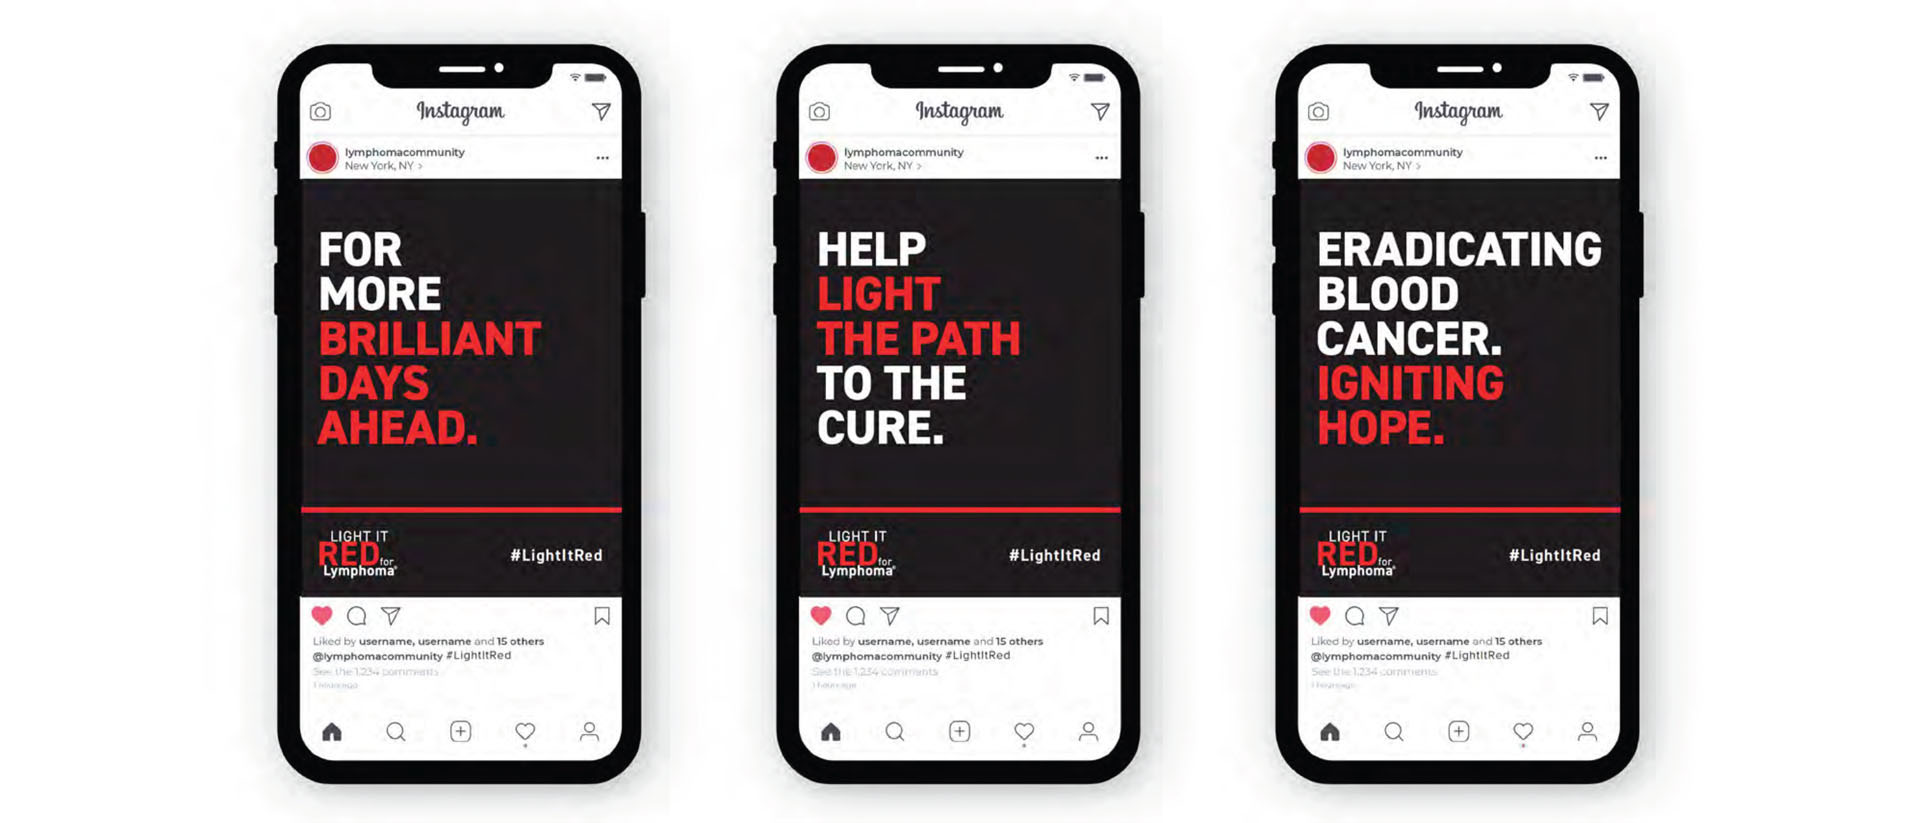 Social Media Advertising for Lymphoma Research Foundation - Instagram Ads